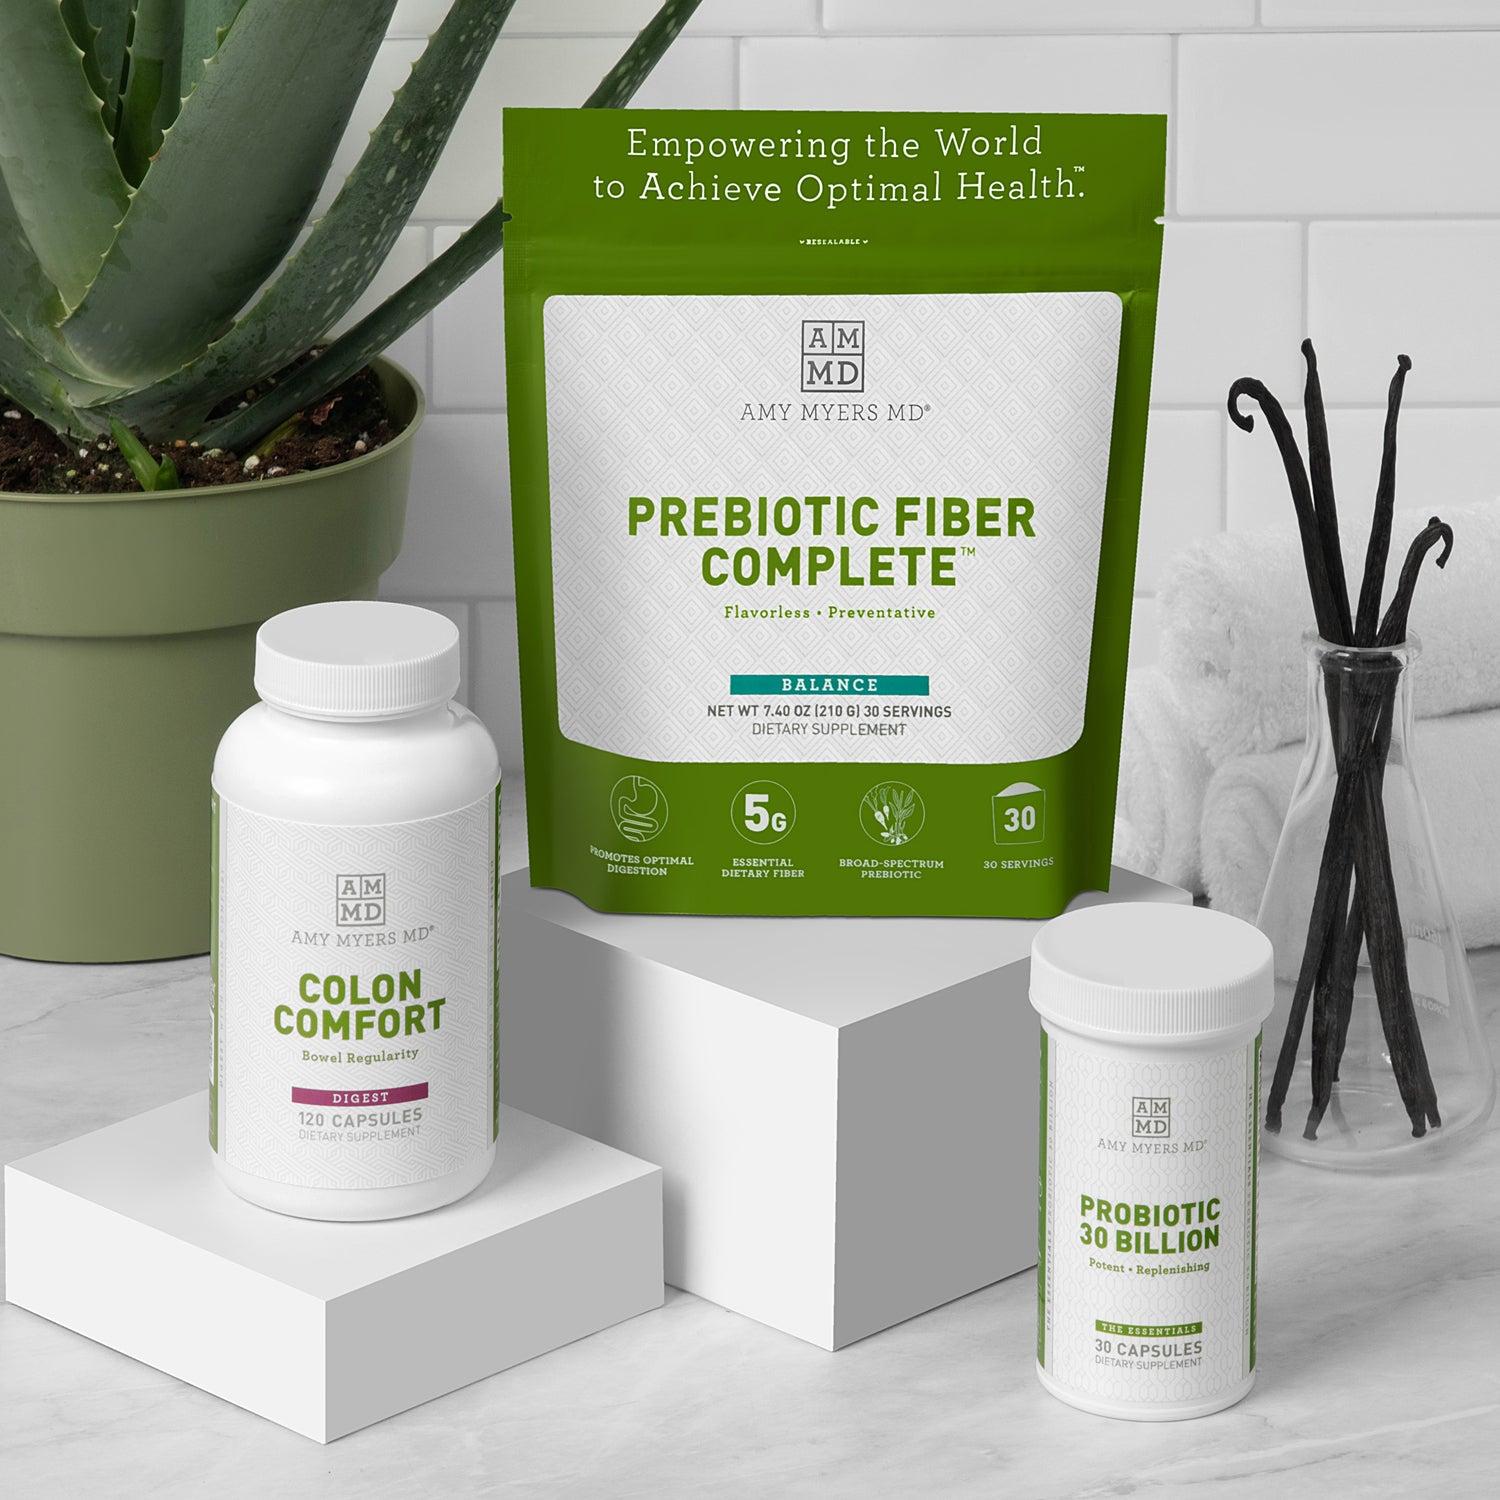 Picture of the AMMD Constipation Support kit, including Colon Comfort 120 Capsule bottle, Probiotic 30 Billion 30 Capsule bottle and Prebiotic Fiber Complete powder resealable bag.  Displayed in bathroom setting with white marble counter, with towels, and an aloe house plant in the background.